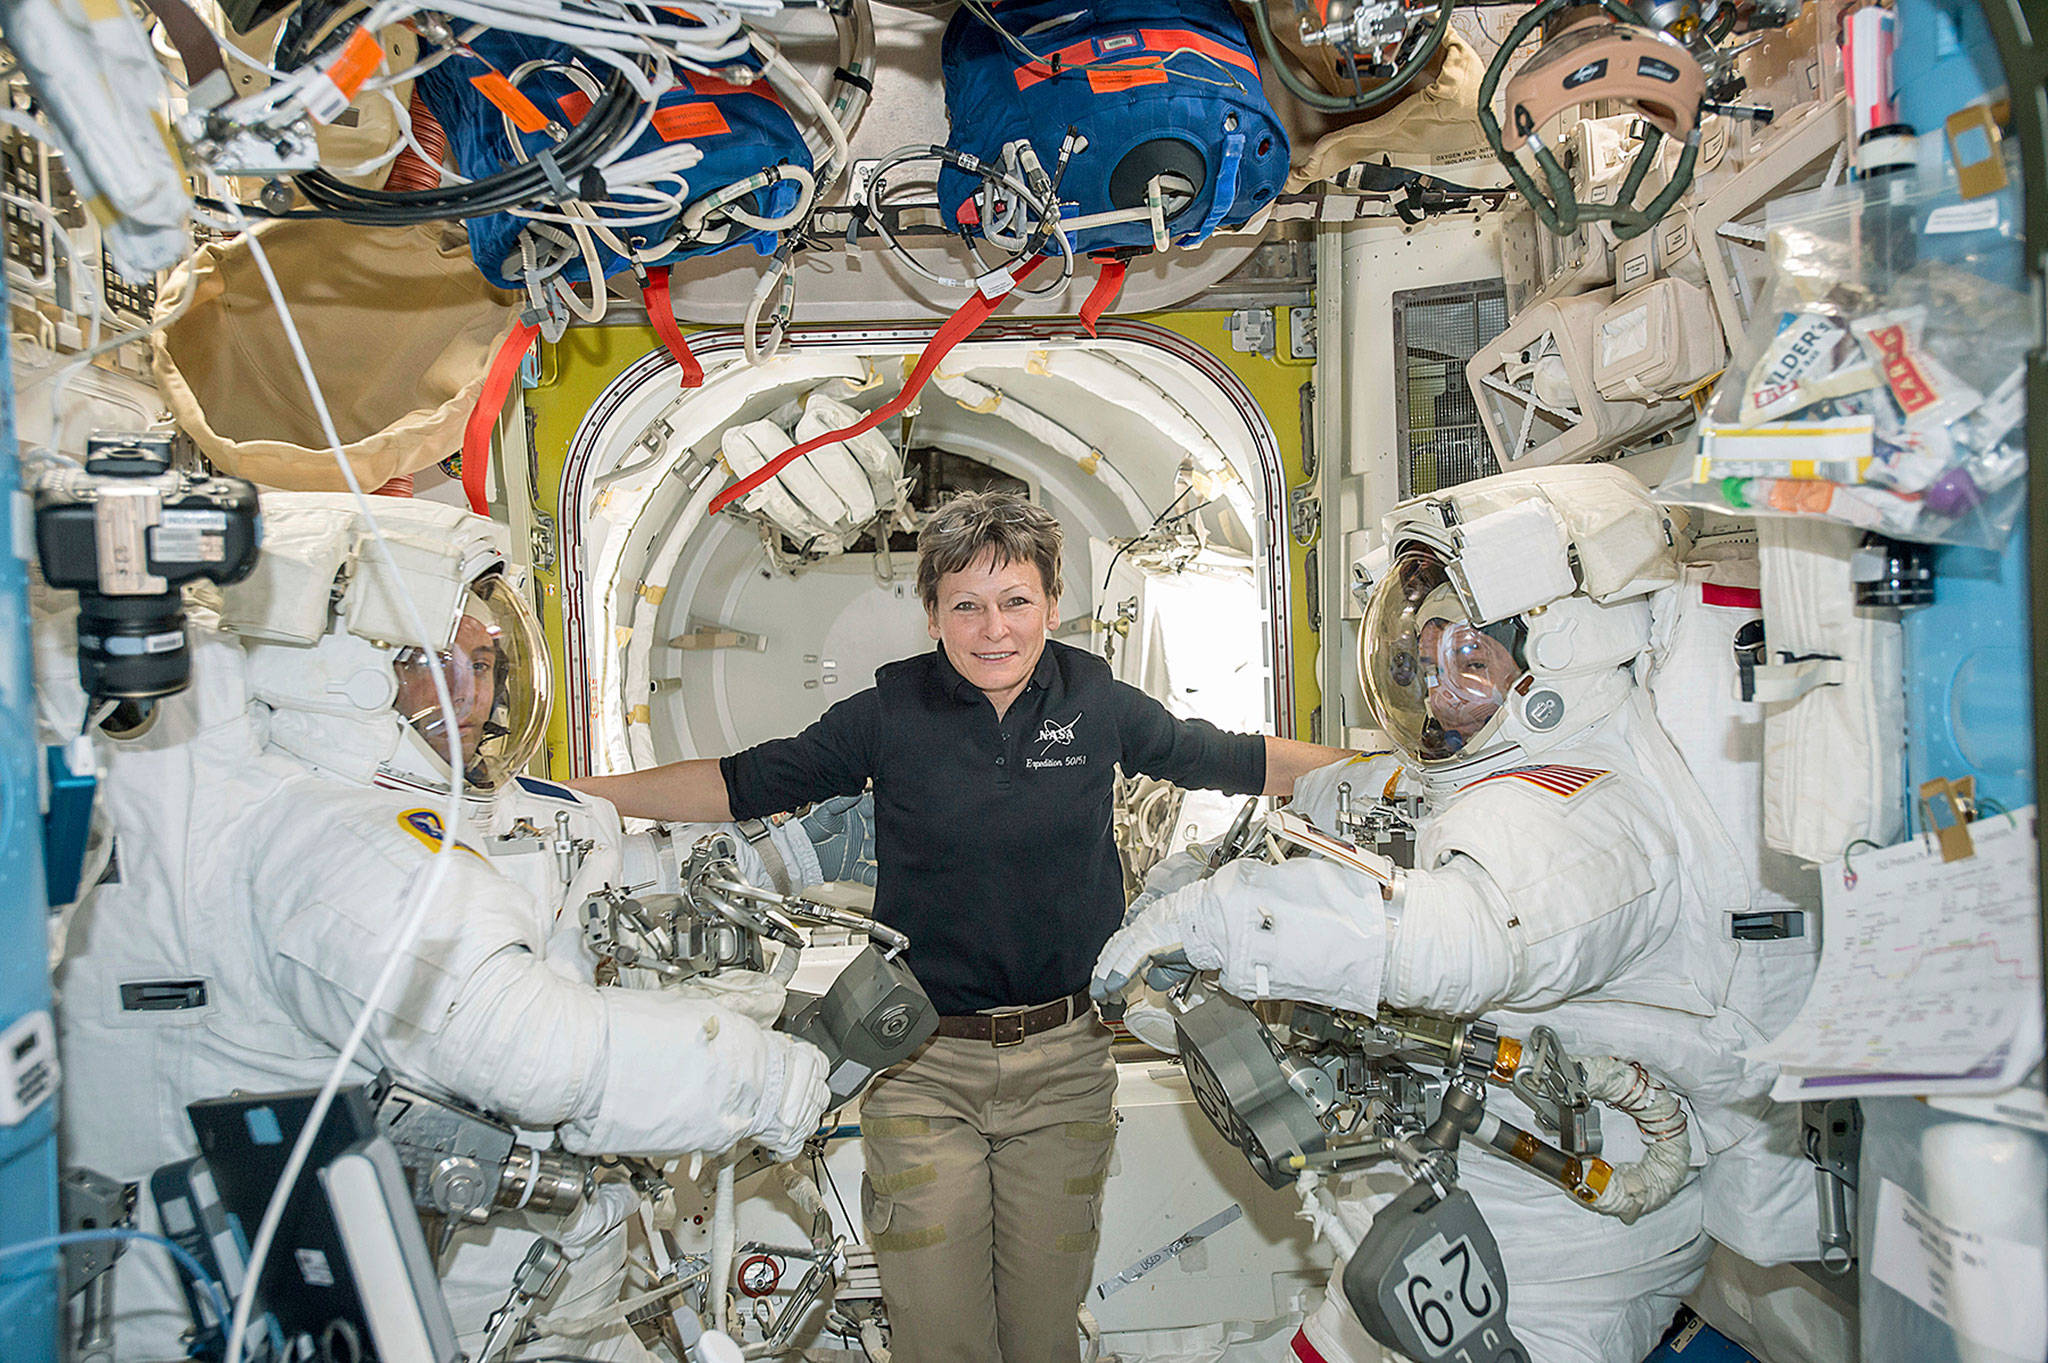 Astronaut Peggy Whitson (center) floats inside the International Space Station with Thomas Pesquet (left) and Shane Kimbrough before their spacewalk in January. Early Monday, space station commander surpassed the 534-day, two-hour-and-48-minute record set last year by Jeffrey Williams for most accumulated time in orbit by an American.(NASA via AP, File)